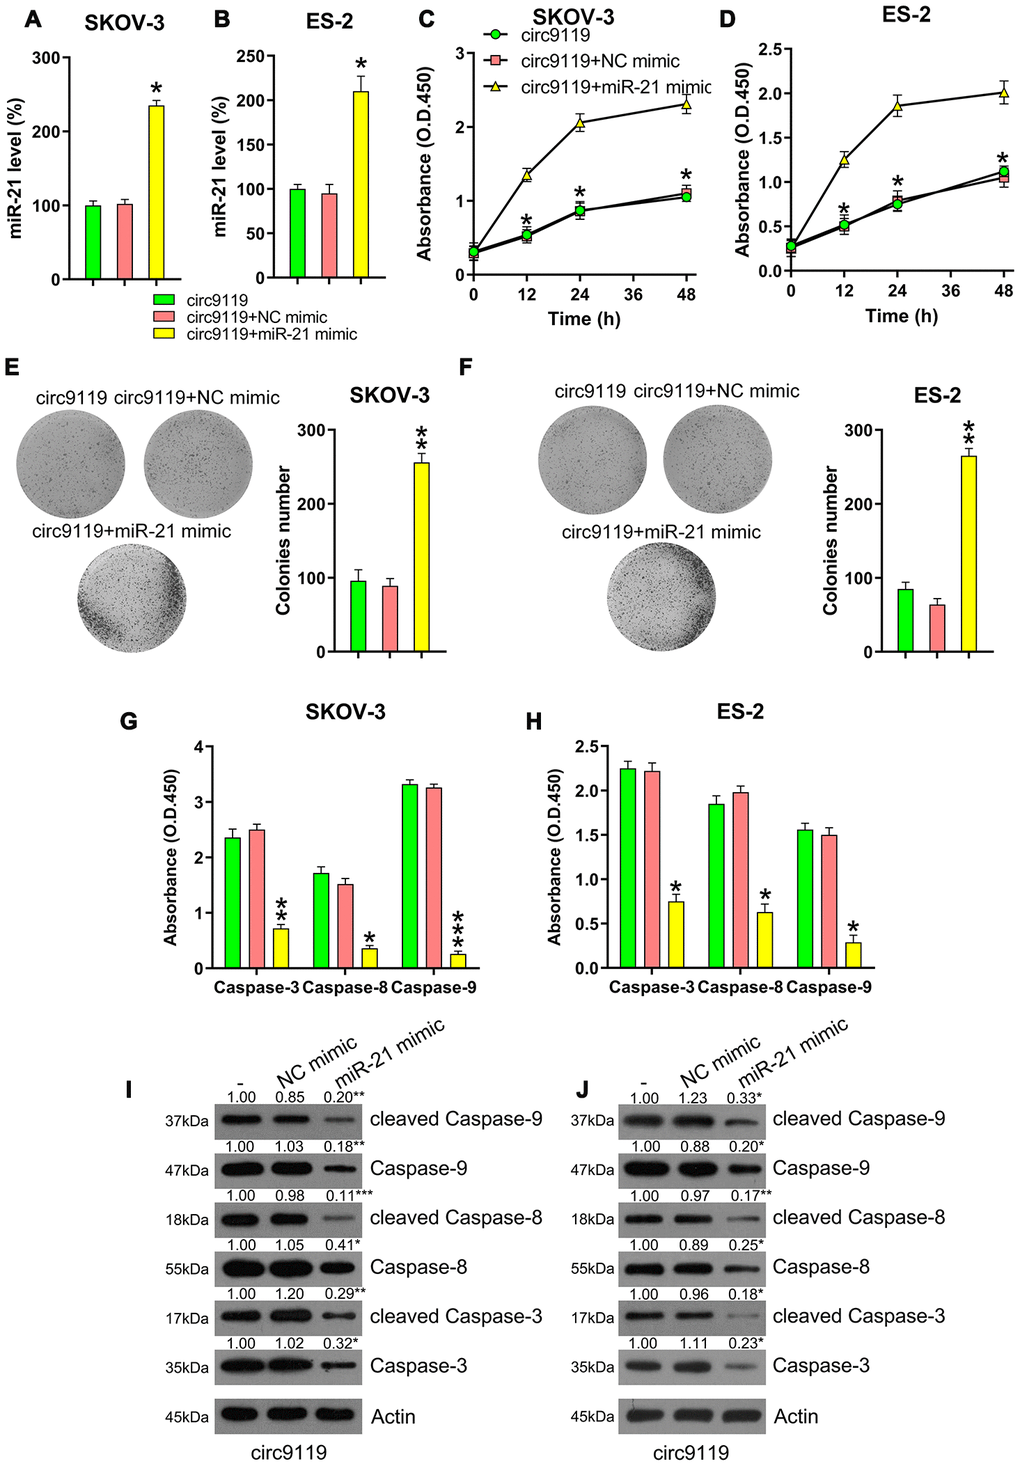 miR-21 mimic reversed the role of circ9119 overexpression on viability and apoptosis of ES-2 and SKOV-3. Cells were subjected to cotransfection with circ9119 overexpressing and miR-21 or NC mimic for 1.5 d. (A, B) qRT–PCR was examined the miR-21 expression. (C, D) MTT was conducted to detect the proliferation rate of SKOV-3 and ES-2 cells under different transfection conditions. (E, F) Colony formation assay indicated the growth of ES-2 and SKOV-3 cells under various transfection conditions. (G, H) Caspase activity detection kit was used to detect the activity of caspase 3, caspase 8, and caspase 9 after transfection. (I, J) Western blotting was conducted to examine the caspase-3, -8, and -9 expression and their cleavage form. Actin represents β-actin. n = 3. *P 